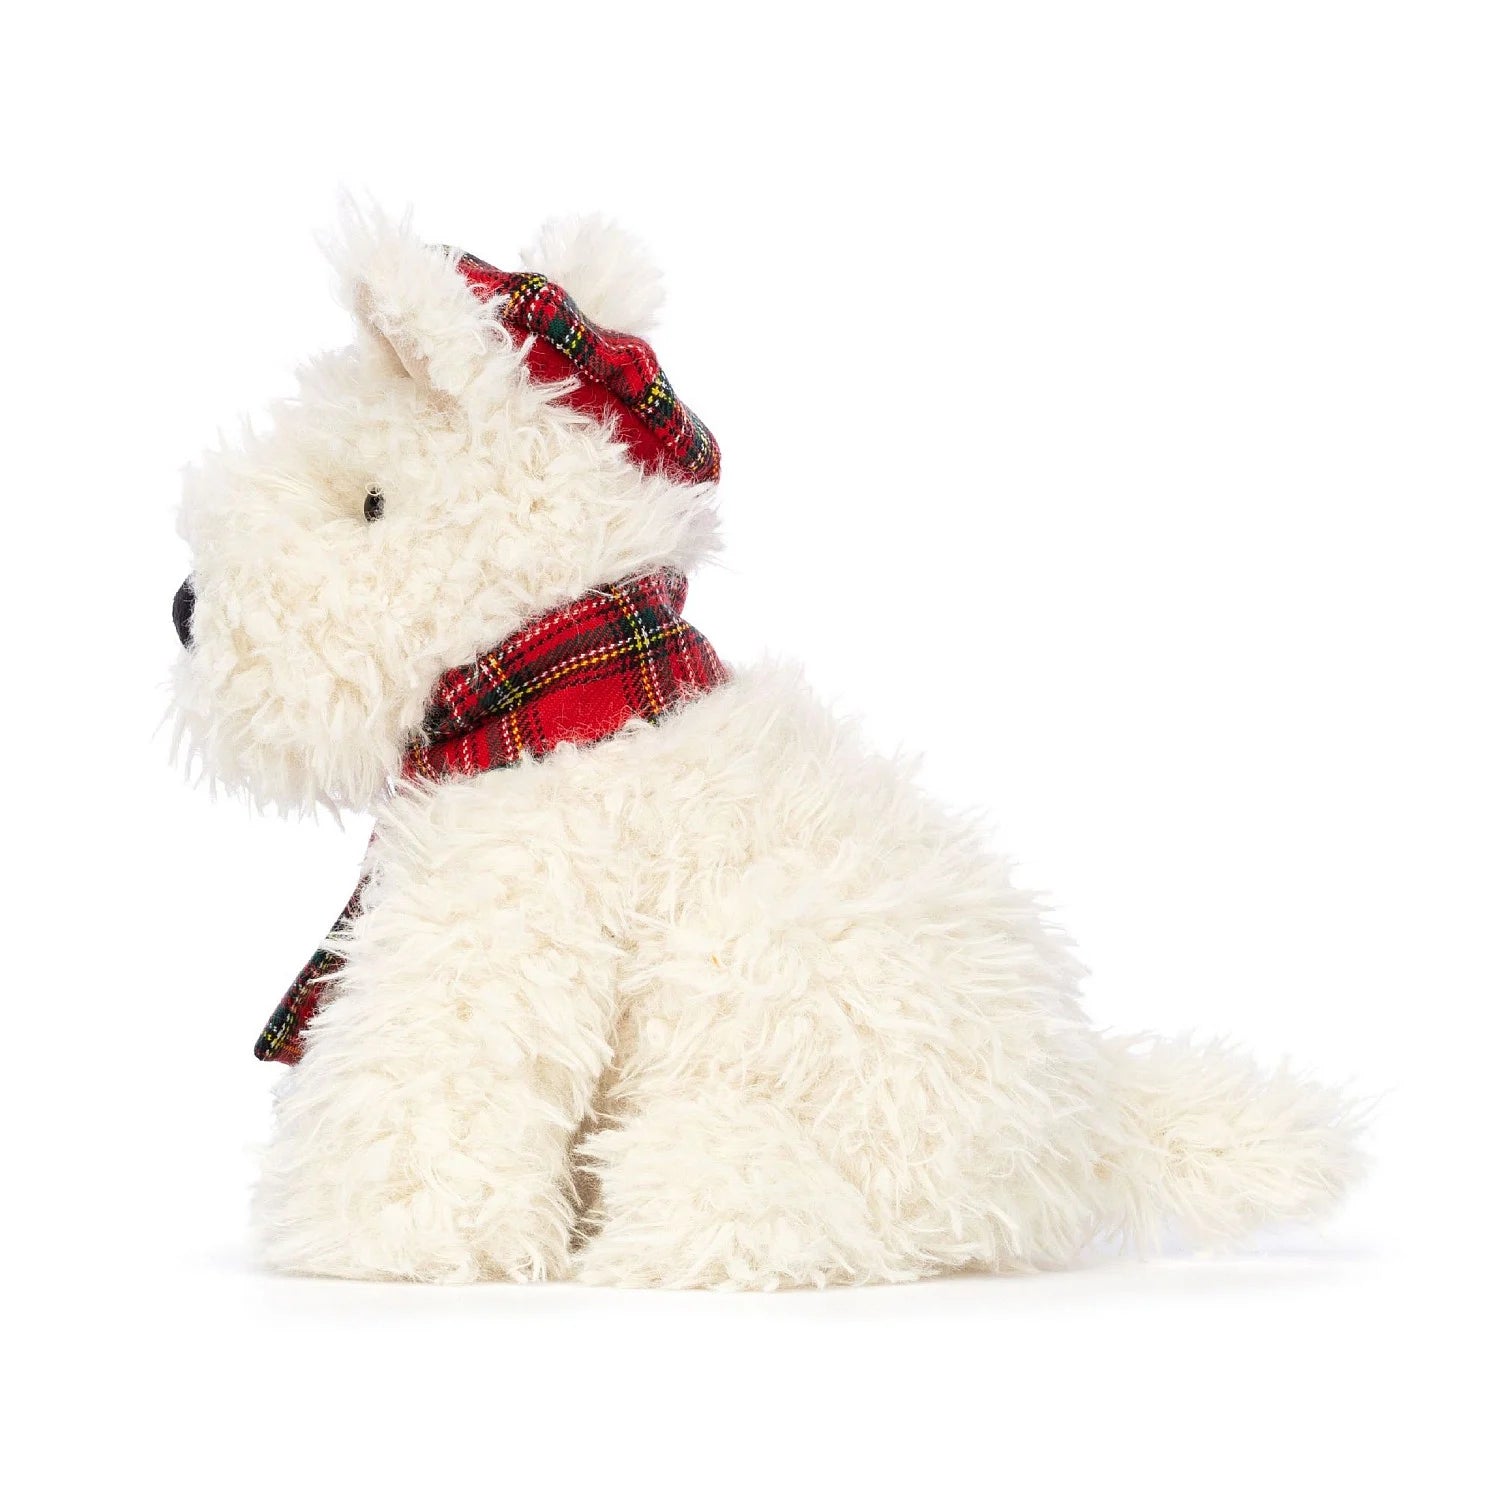 Side-view: Munro the Scottie Dog is a white plush stuffed dog with luxurious fur. This Winter Warmer version of Munro Scottie Dog adds an extra stylish red tartan plaid scarf around its neck. Munro's floppy ears and wagging tail give it an endearing and playful appearance. Its high-quality craftsmanship and attention to detail make it a fantastic choice for dog lovers of all ages.